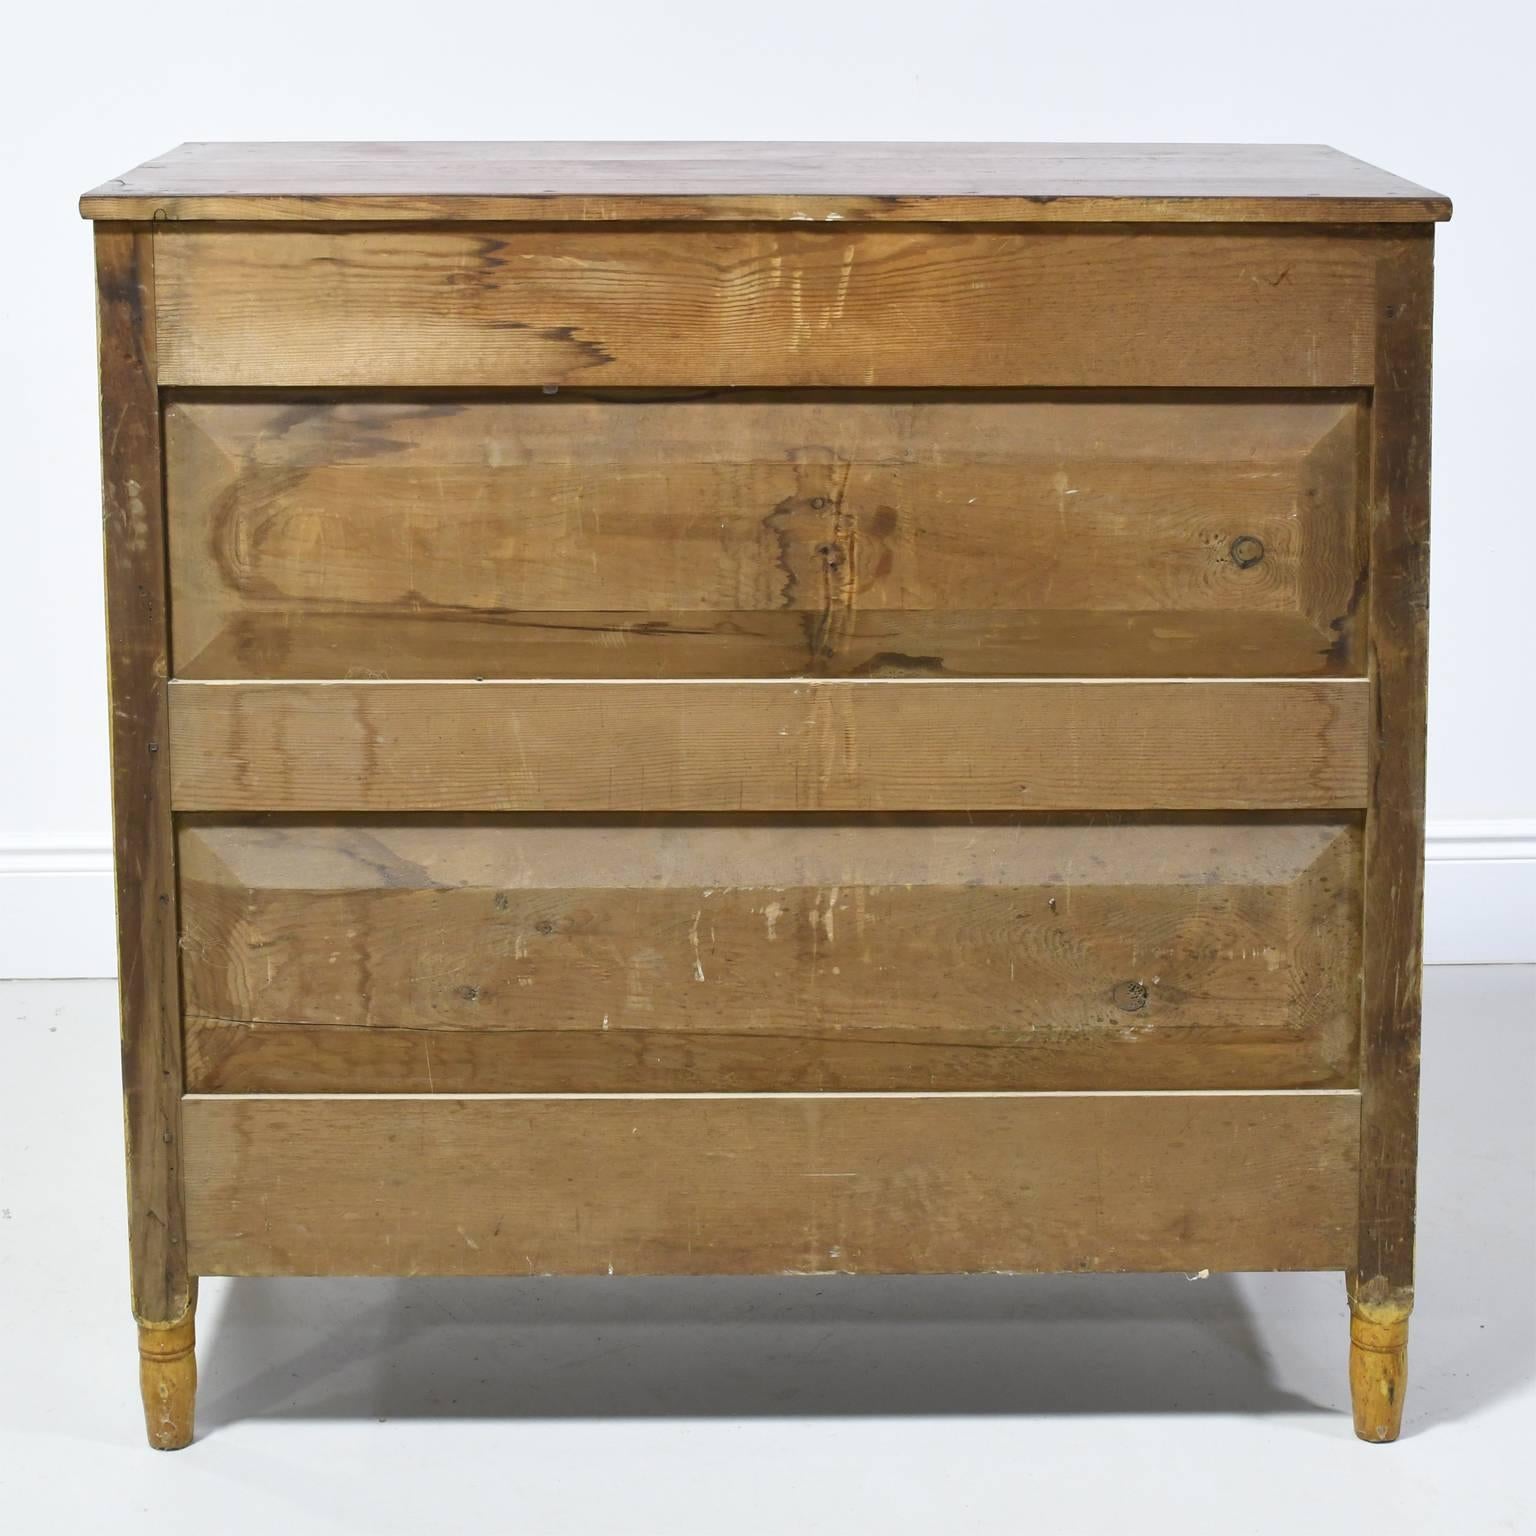 Wood Lancaster County American Empire Faux-Grained Chest of Drawers, circa 1830